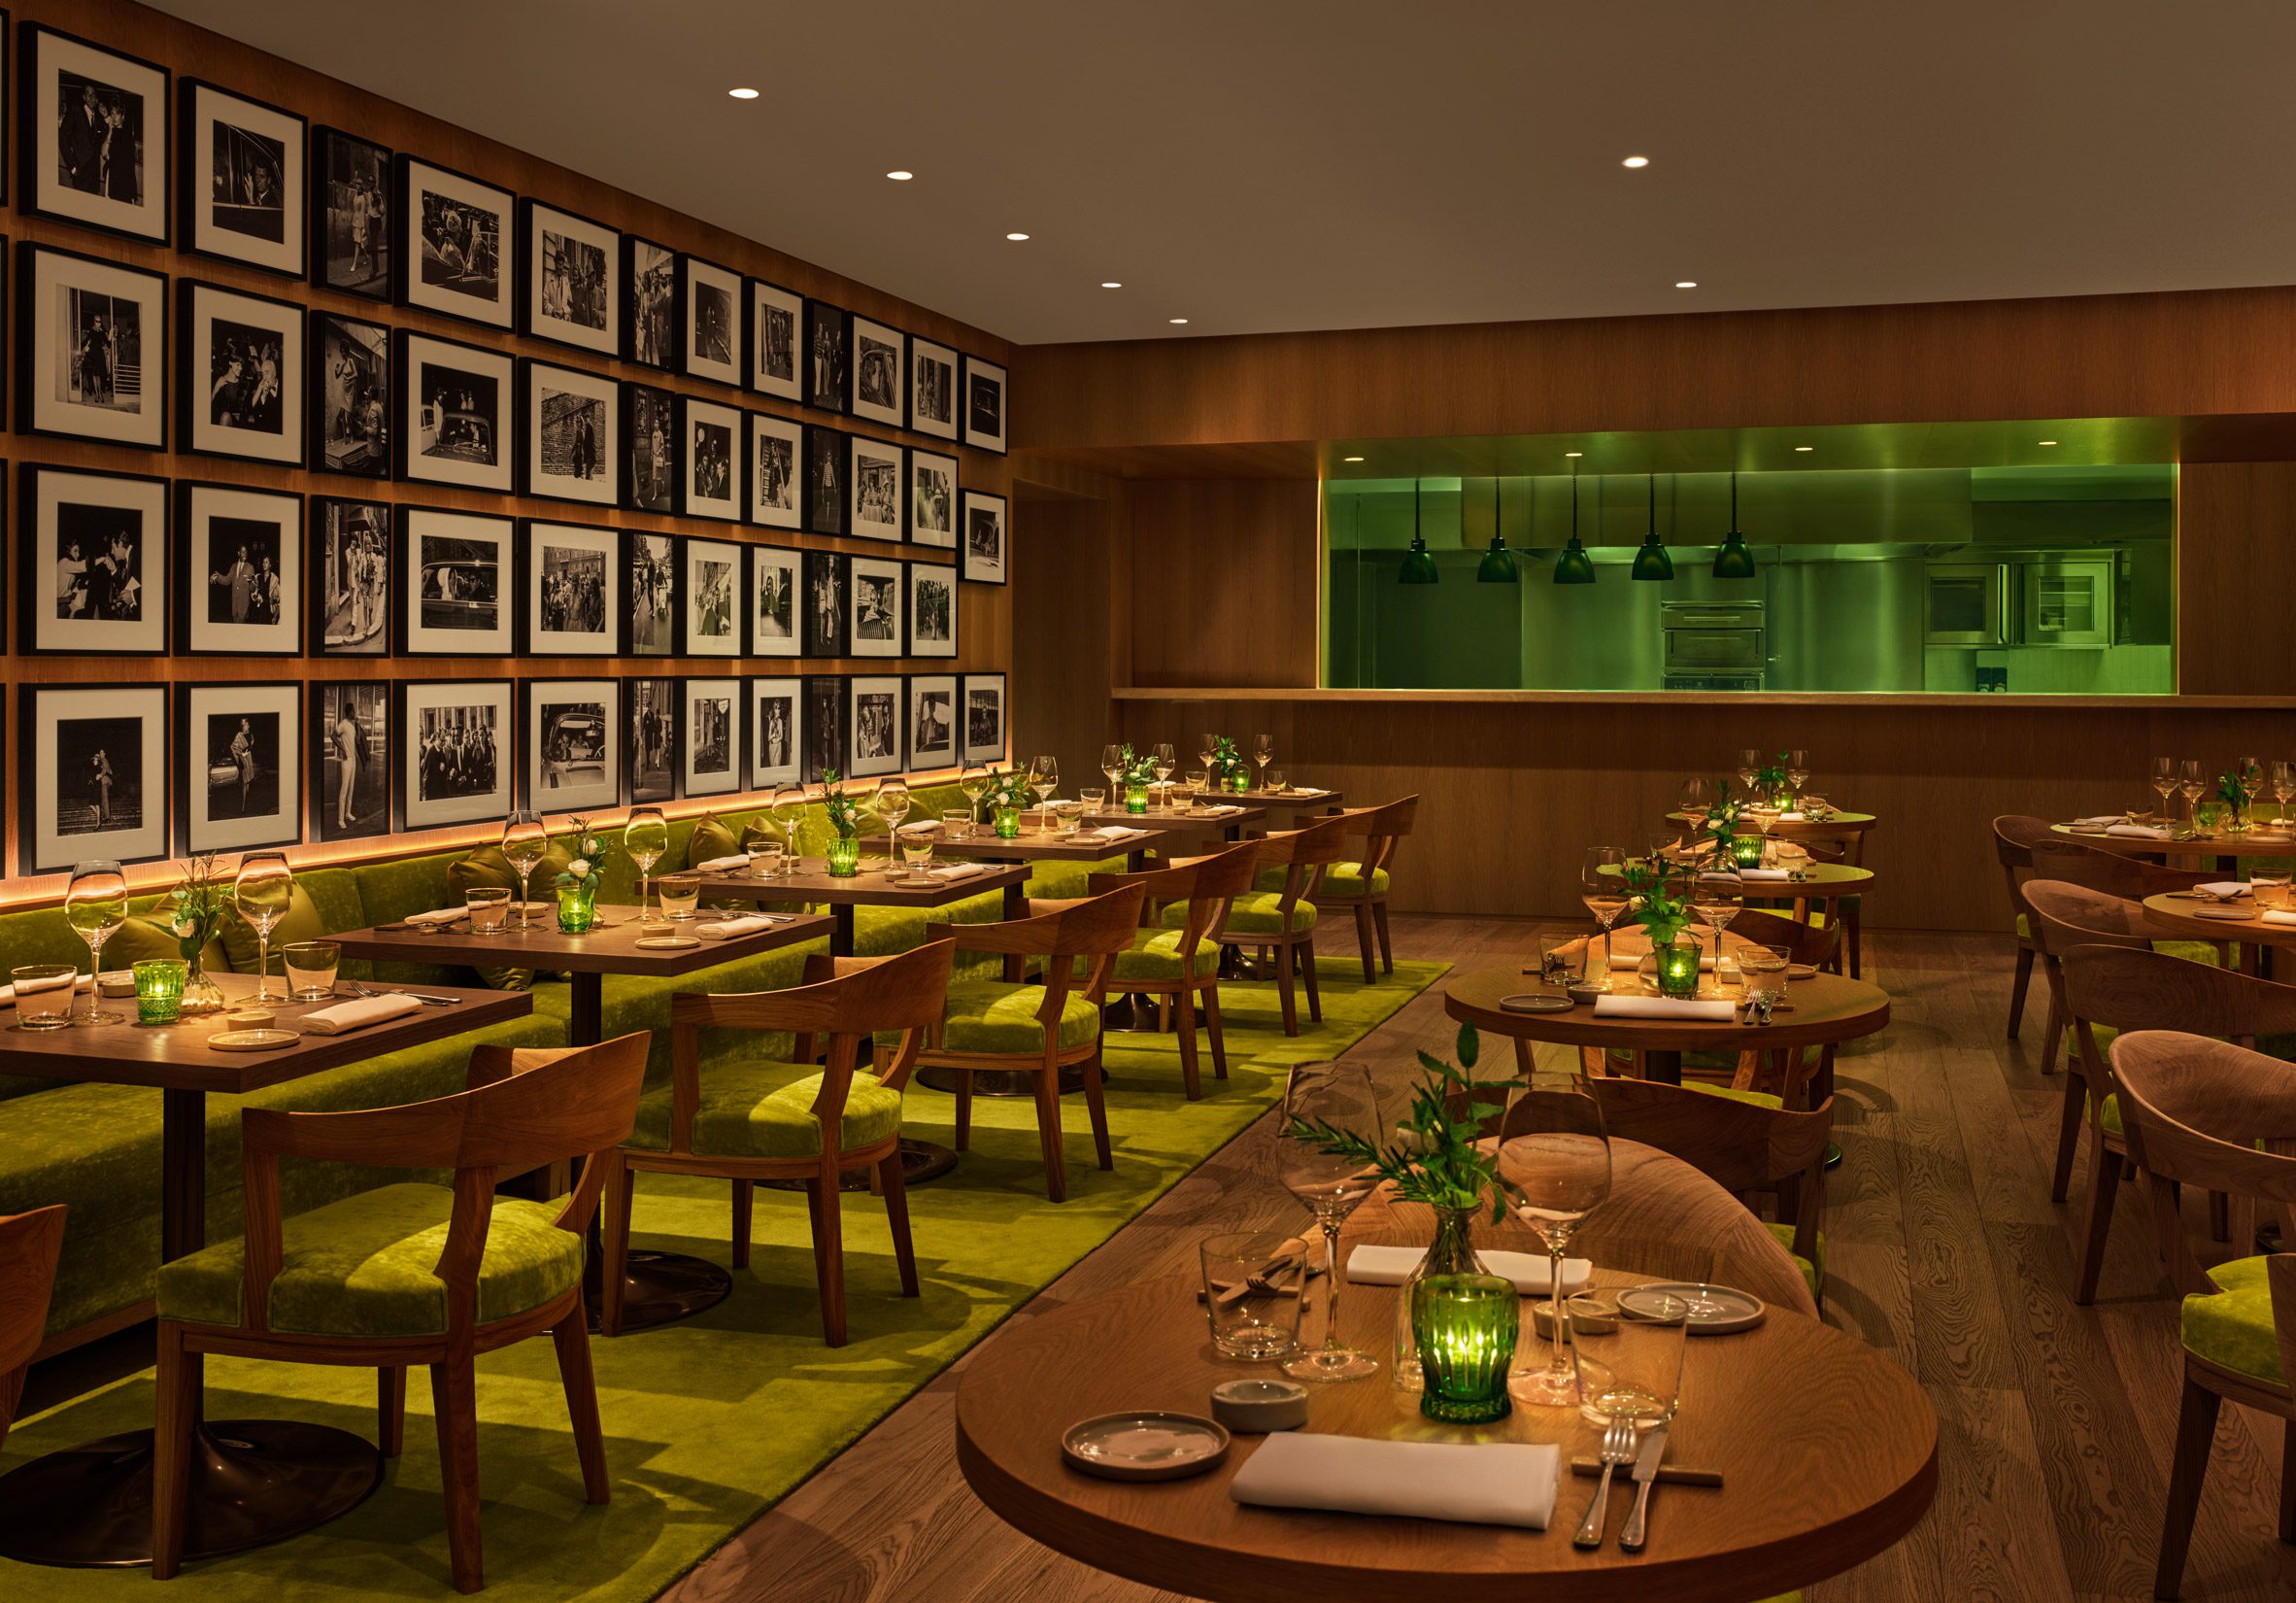 Restaurant with wooden furniture and chartreuse-coloured upholstery